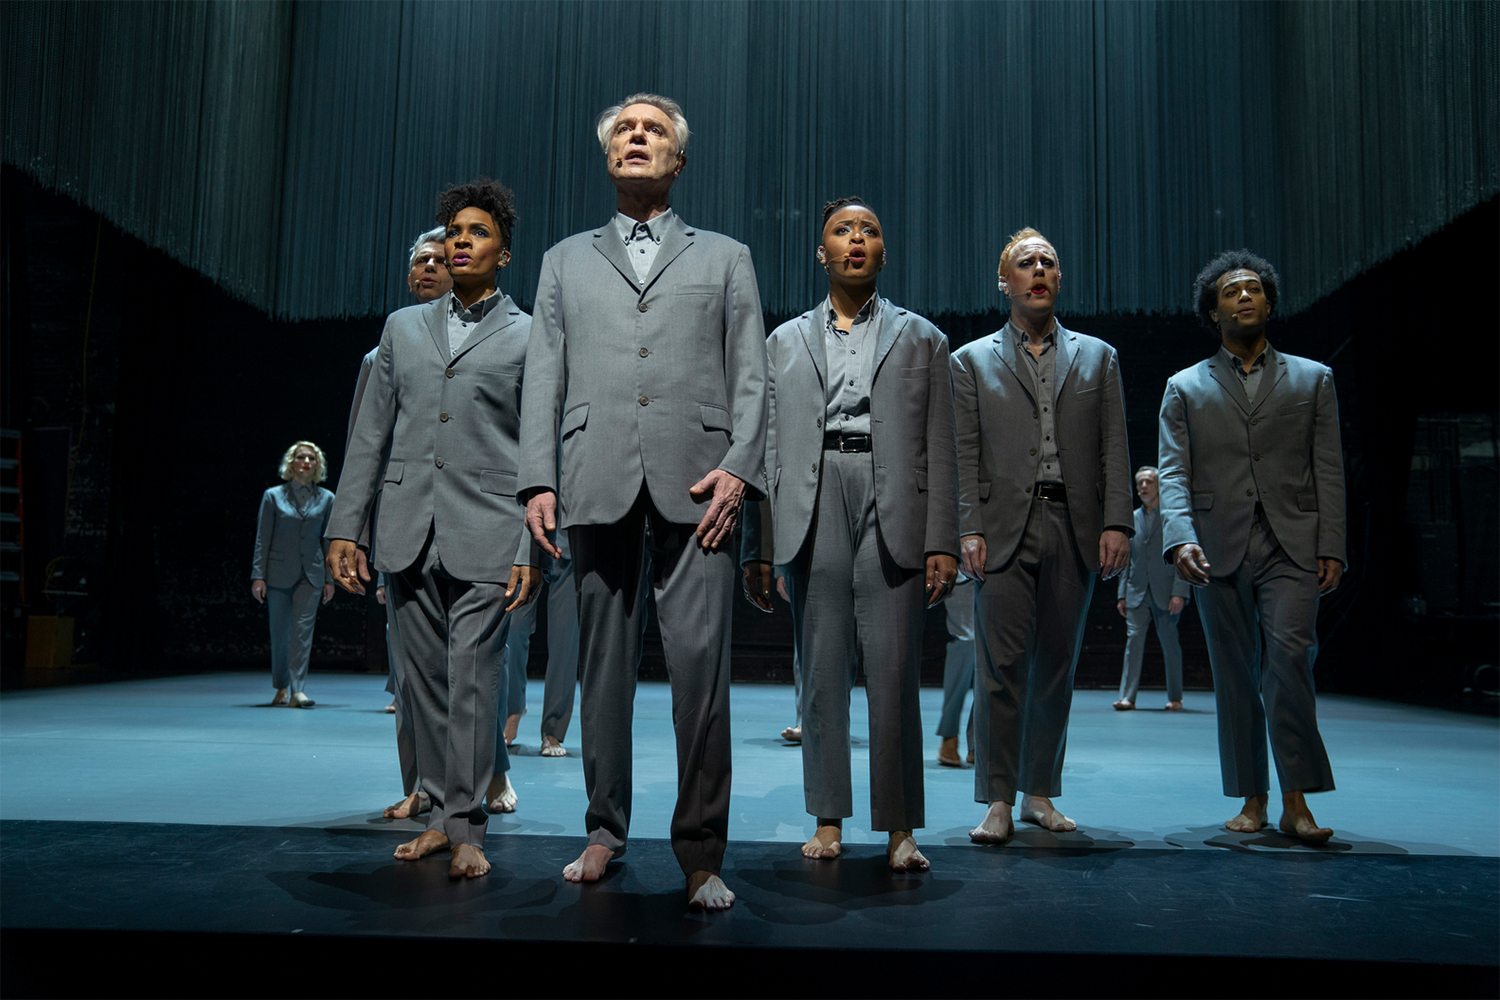 David Byrne in HBO's adaptation of "American Utopia" directed by Spike Lee